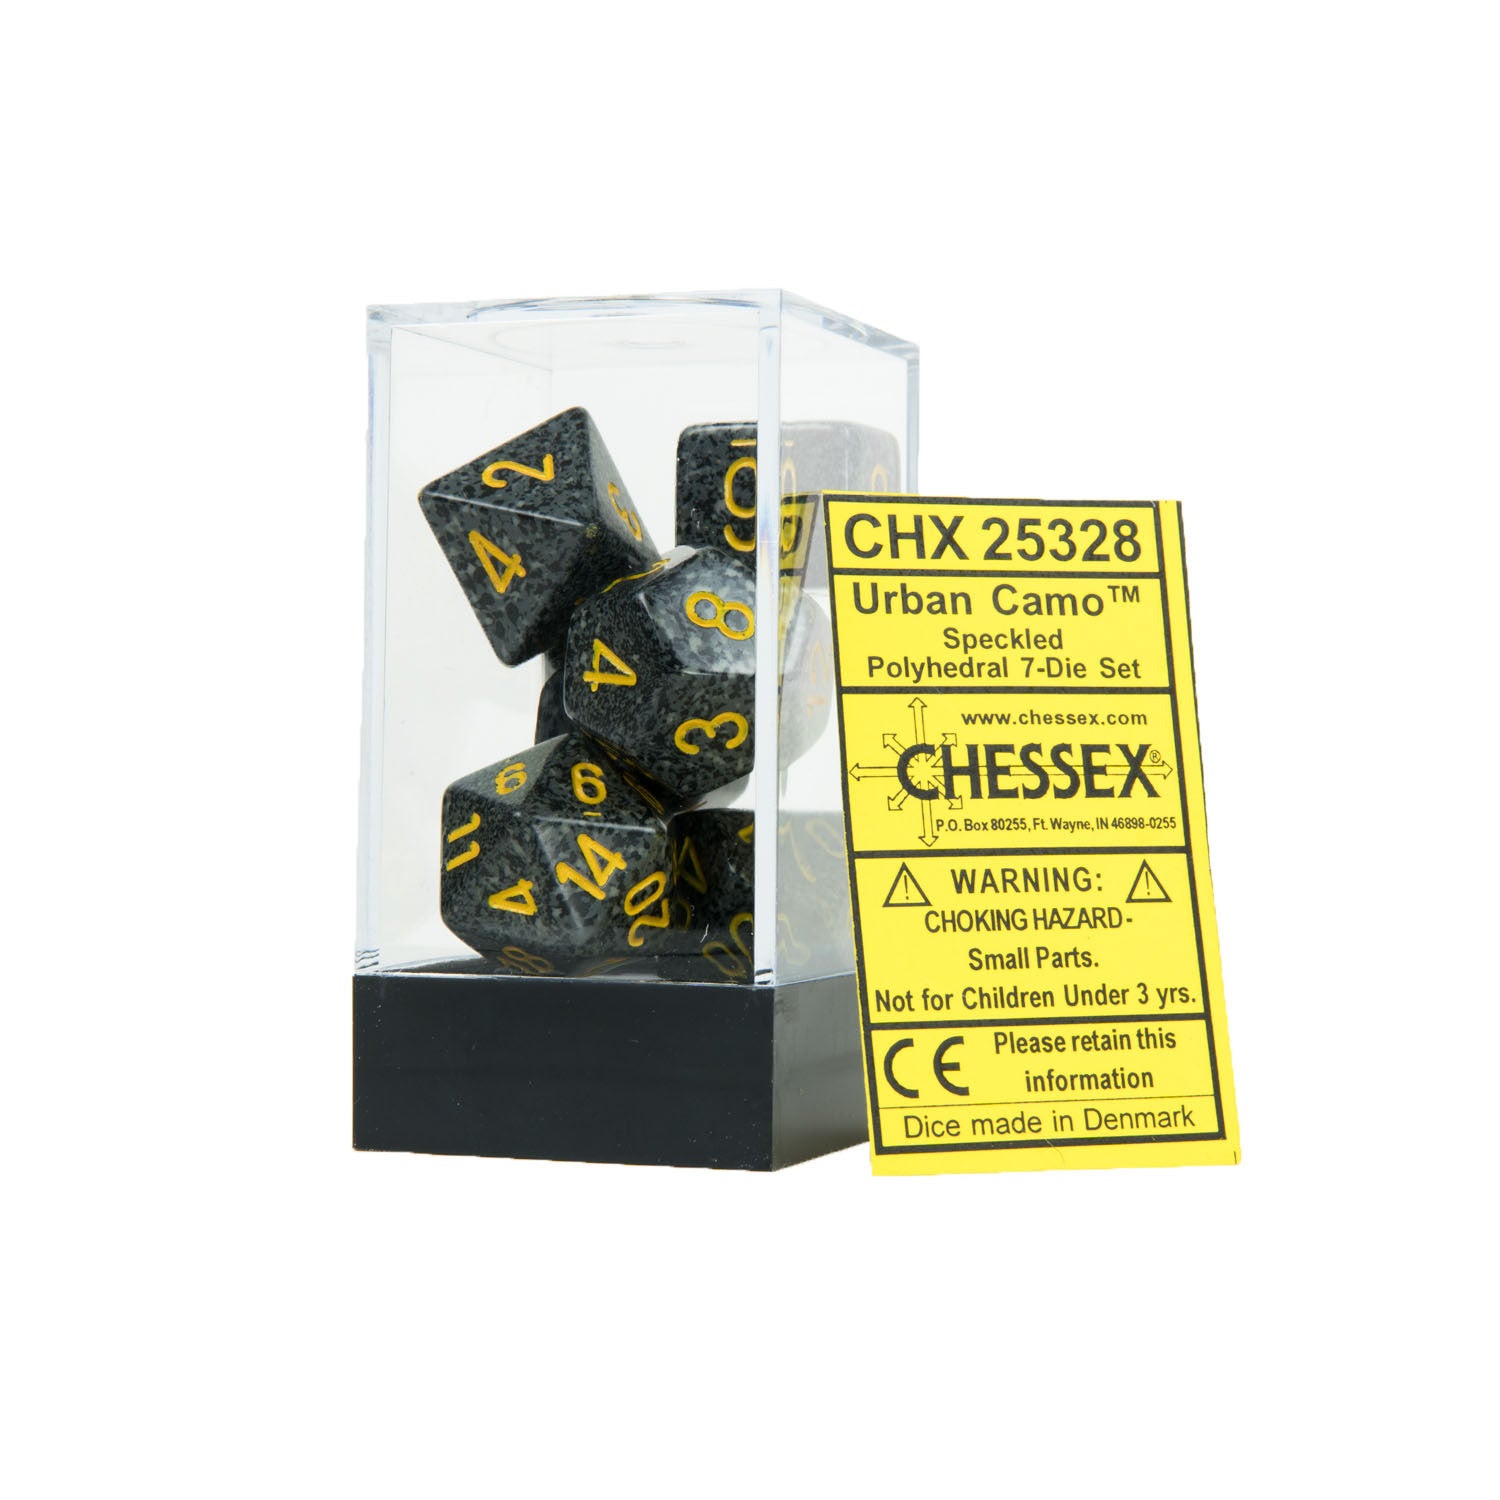 Chessex CHX25328 Urban Camo™ Speckled Polyhedral Dice Set